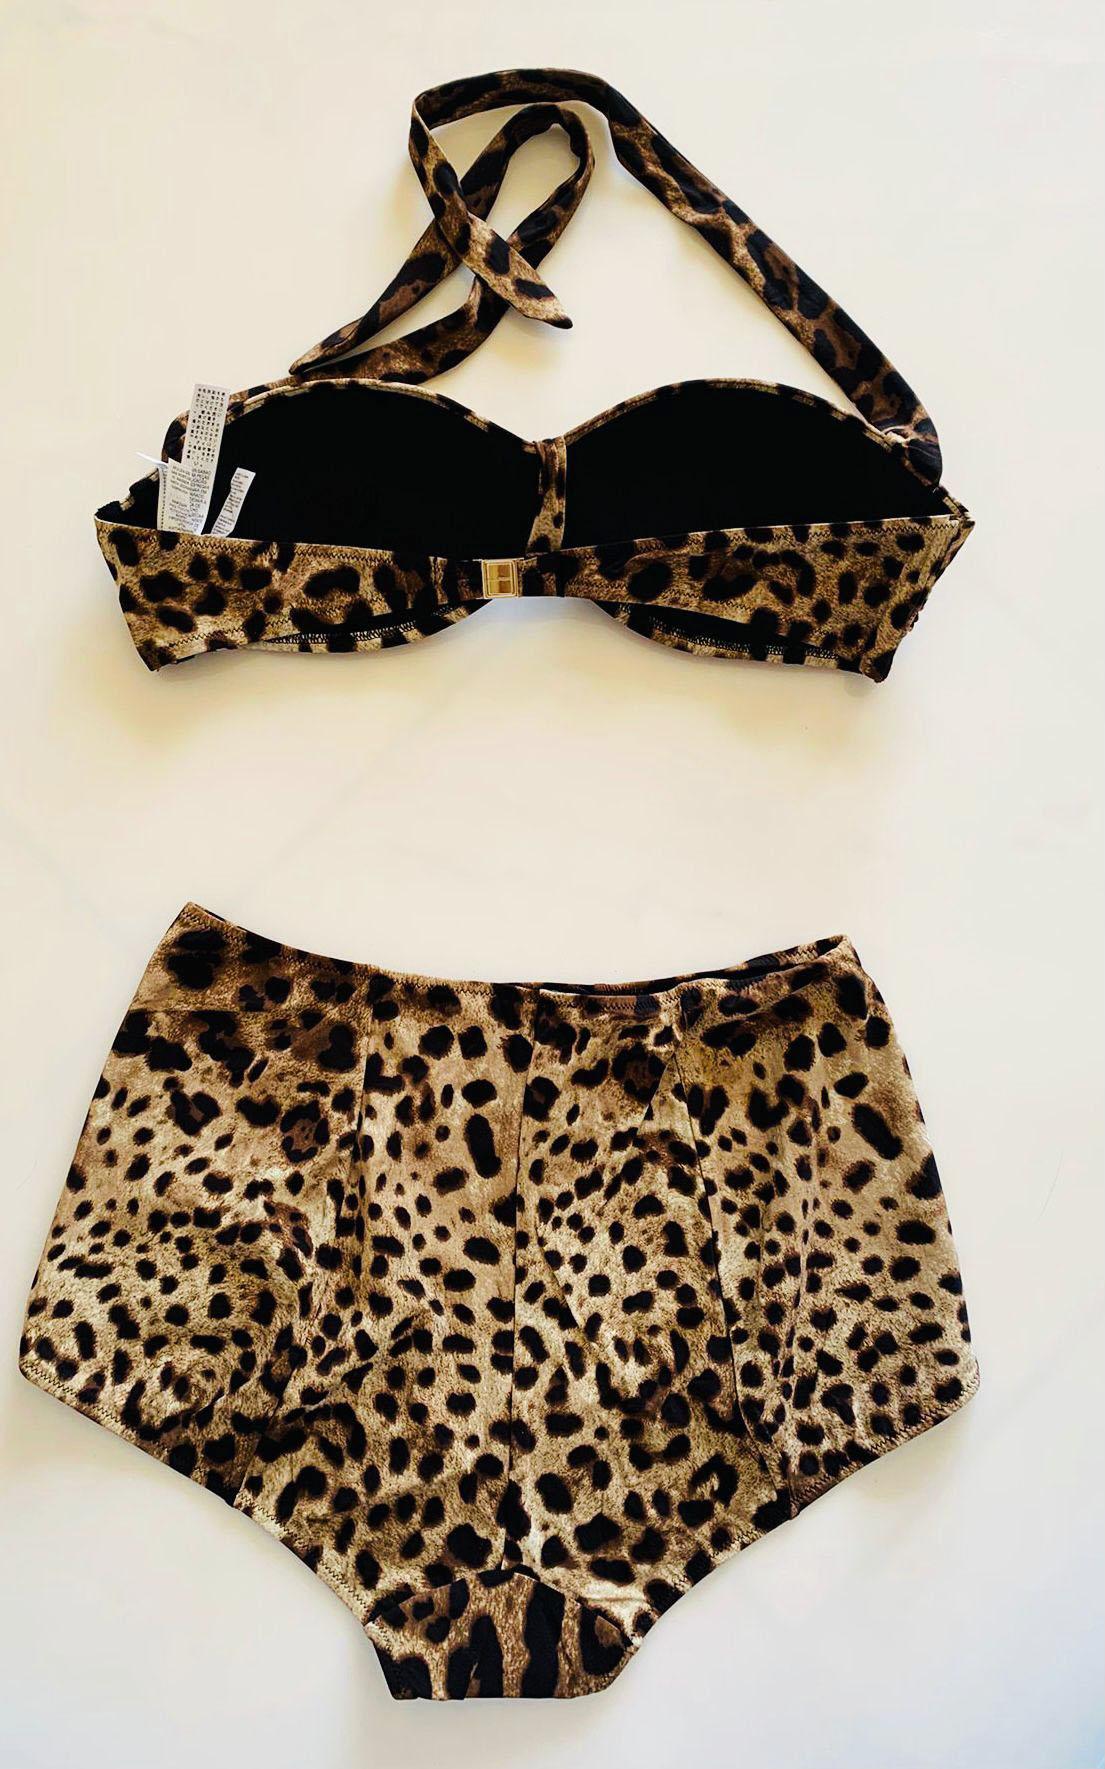 Dolce & Gabbana romantic retro bandeau bikini top offers a sophisticated look thanks to the LEOPARD print and is made of the precious “sensitive fabric”. The shaped cups guarantee structure and support. 
The bikini bottom with a high waistline has